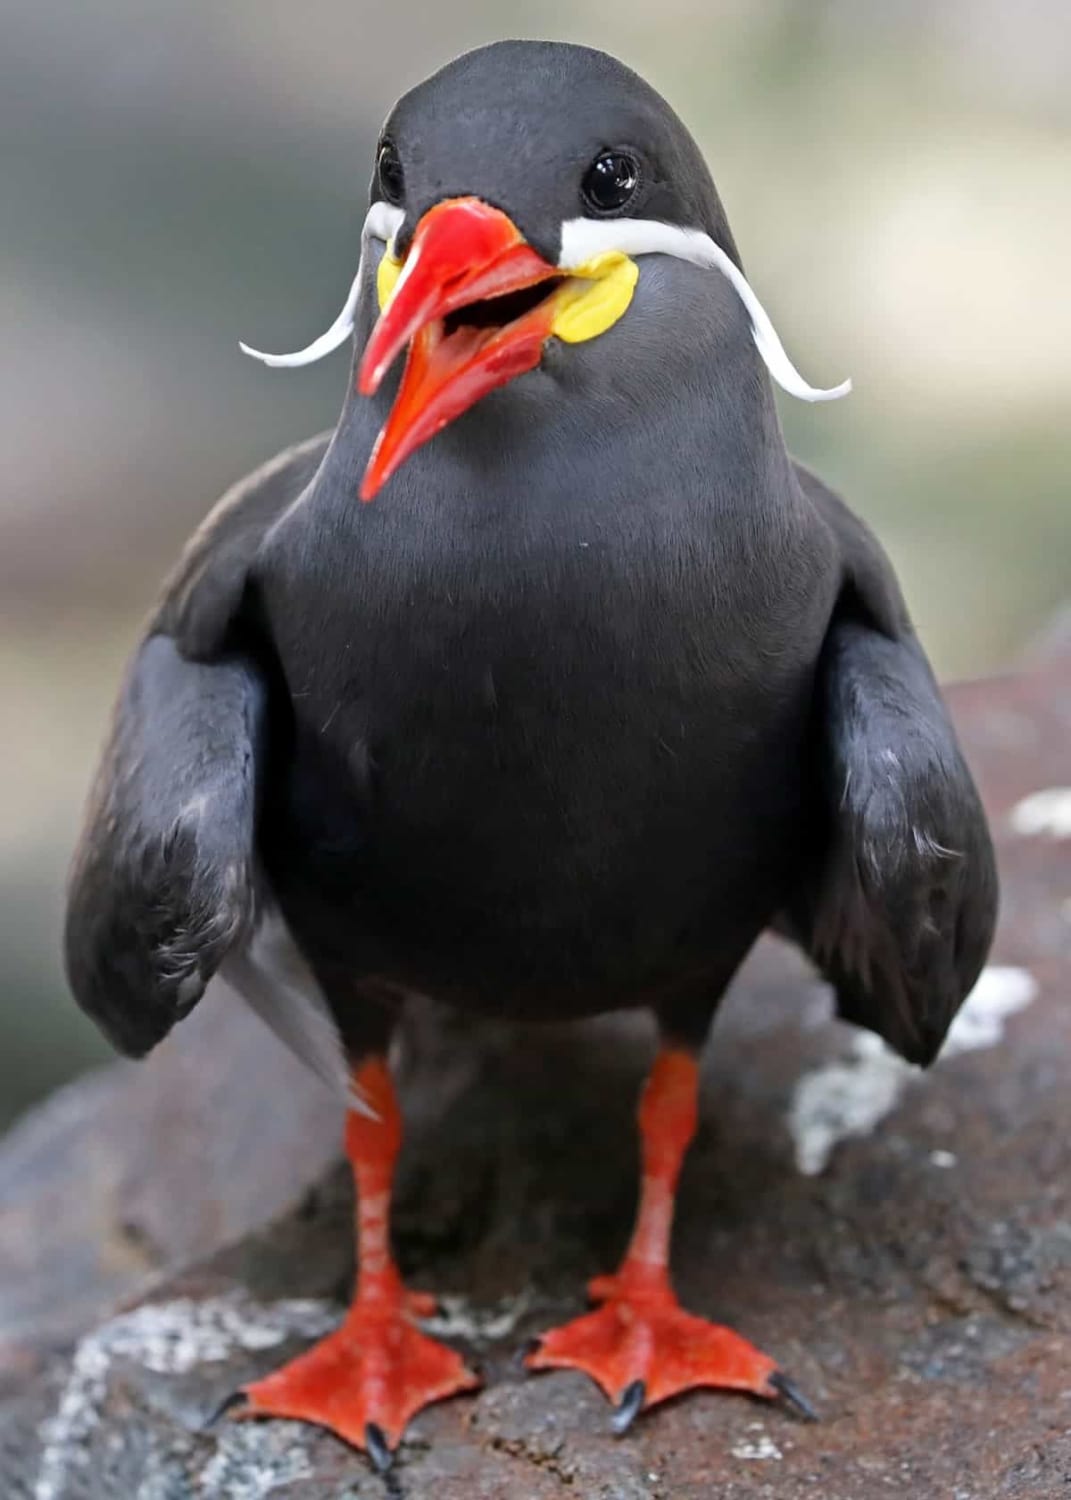 Both male and female Inca terns sport handle bar mustaches of long white feathers. Longer mustaches are indicators of better body condition, more fertility, and healthier offspring.